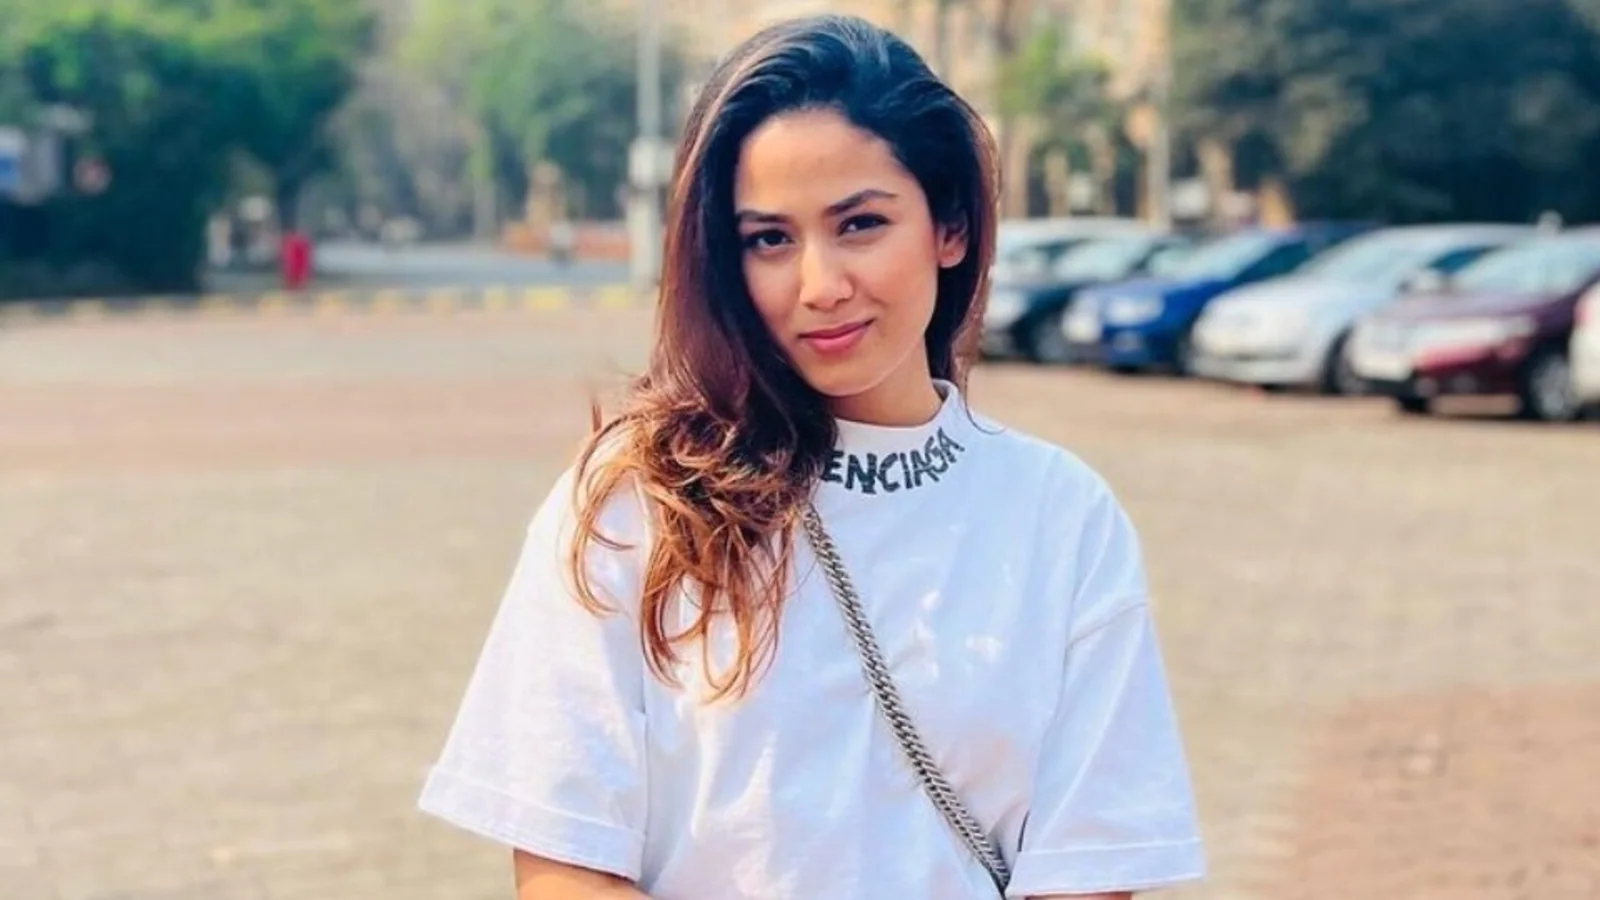 Mira Rajput is a ‘Delhi Girl in Mumbai’ as she enjoys outing in ₹32k oversized top and mini shorts: See pic, video